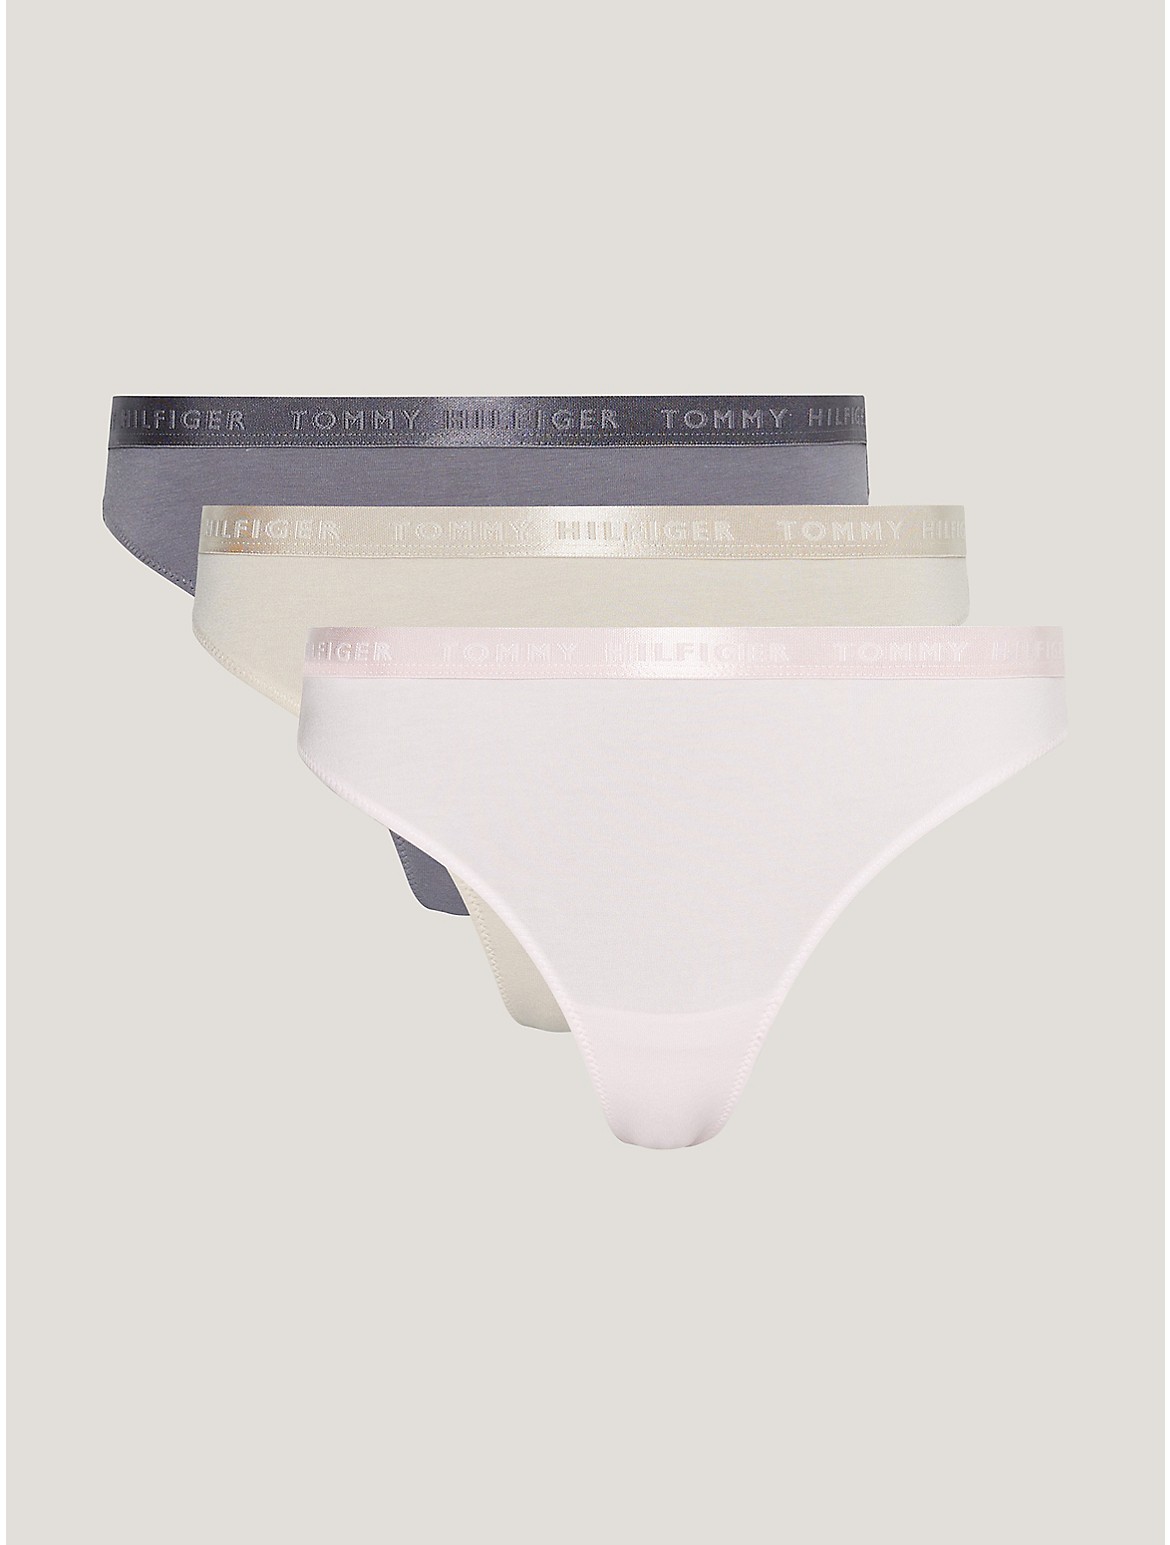 Tommy Hilfiger Women's Everyday Luxe Thong 3-Pack - Multi - XL